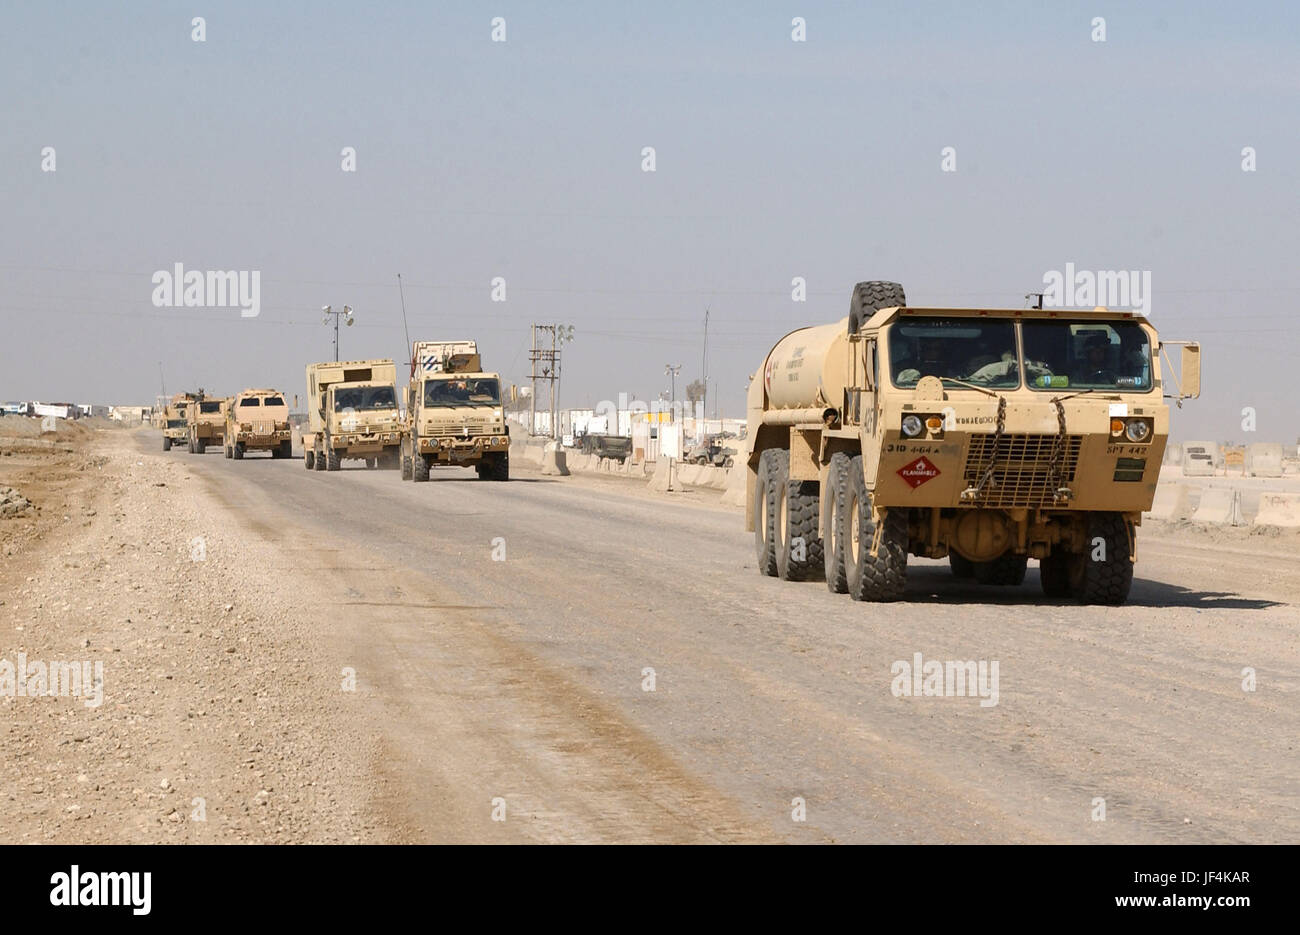 050216-F-3408B-015 Vehicles from the Army's 3rd Infantry Division form a convoy as they depart Camp Cedar II in central Iraq bound for Kuwait on Feb. 16, 2005.  DoD photo by Master Sgt. Mark Bucher, U.S. Air Force.  (Released) Stock Photo